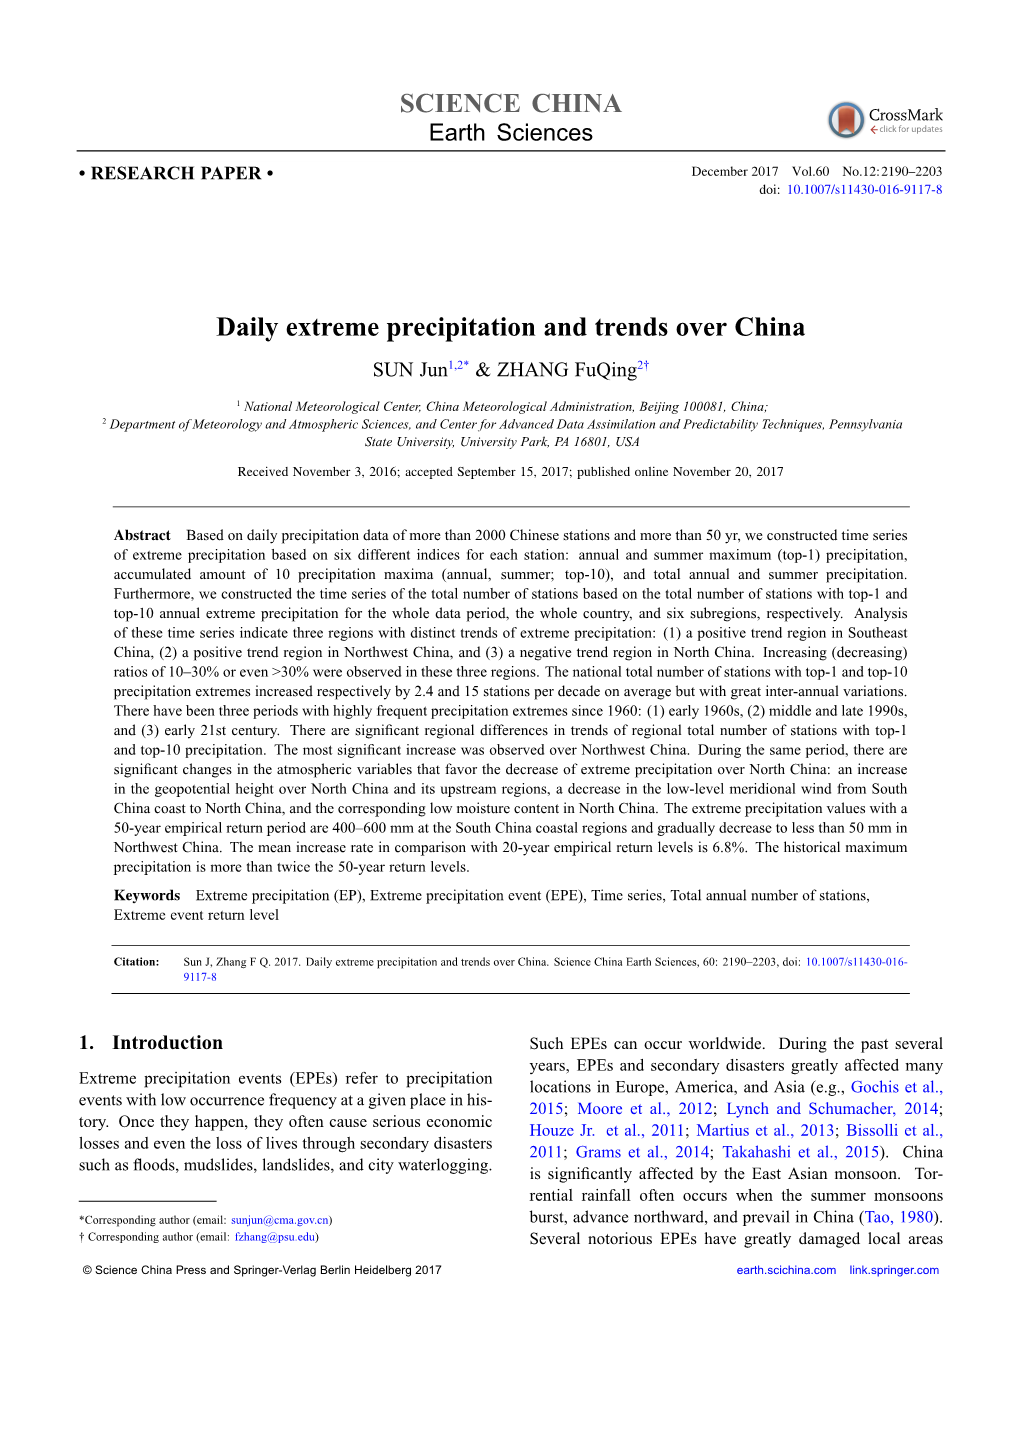 Daily Extreme Precipitation and Trends Over China SUN Jun1,2* & ZHANG Fuqing2†